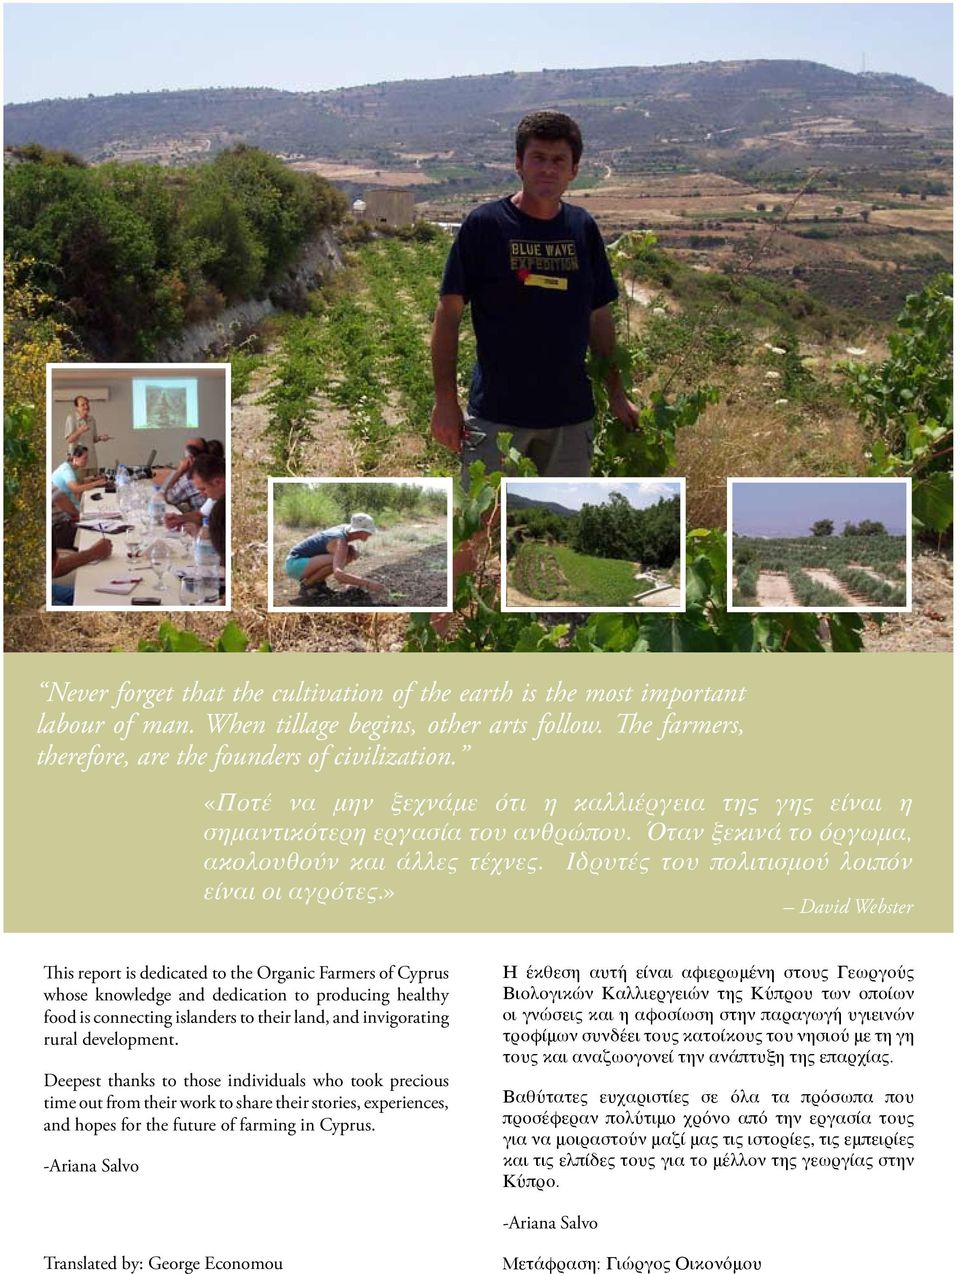 » David Webster This report is dedicated to the Organic Farmers of Cyprus whose knowledge and dedication to producing healthy food is connecting islanders to their land, and invigorating rural